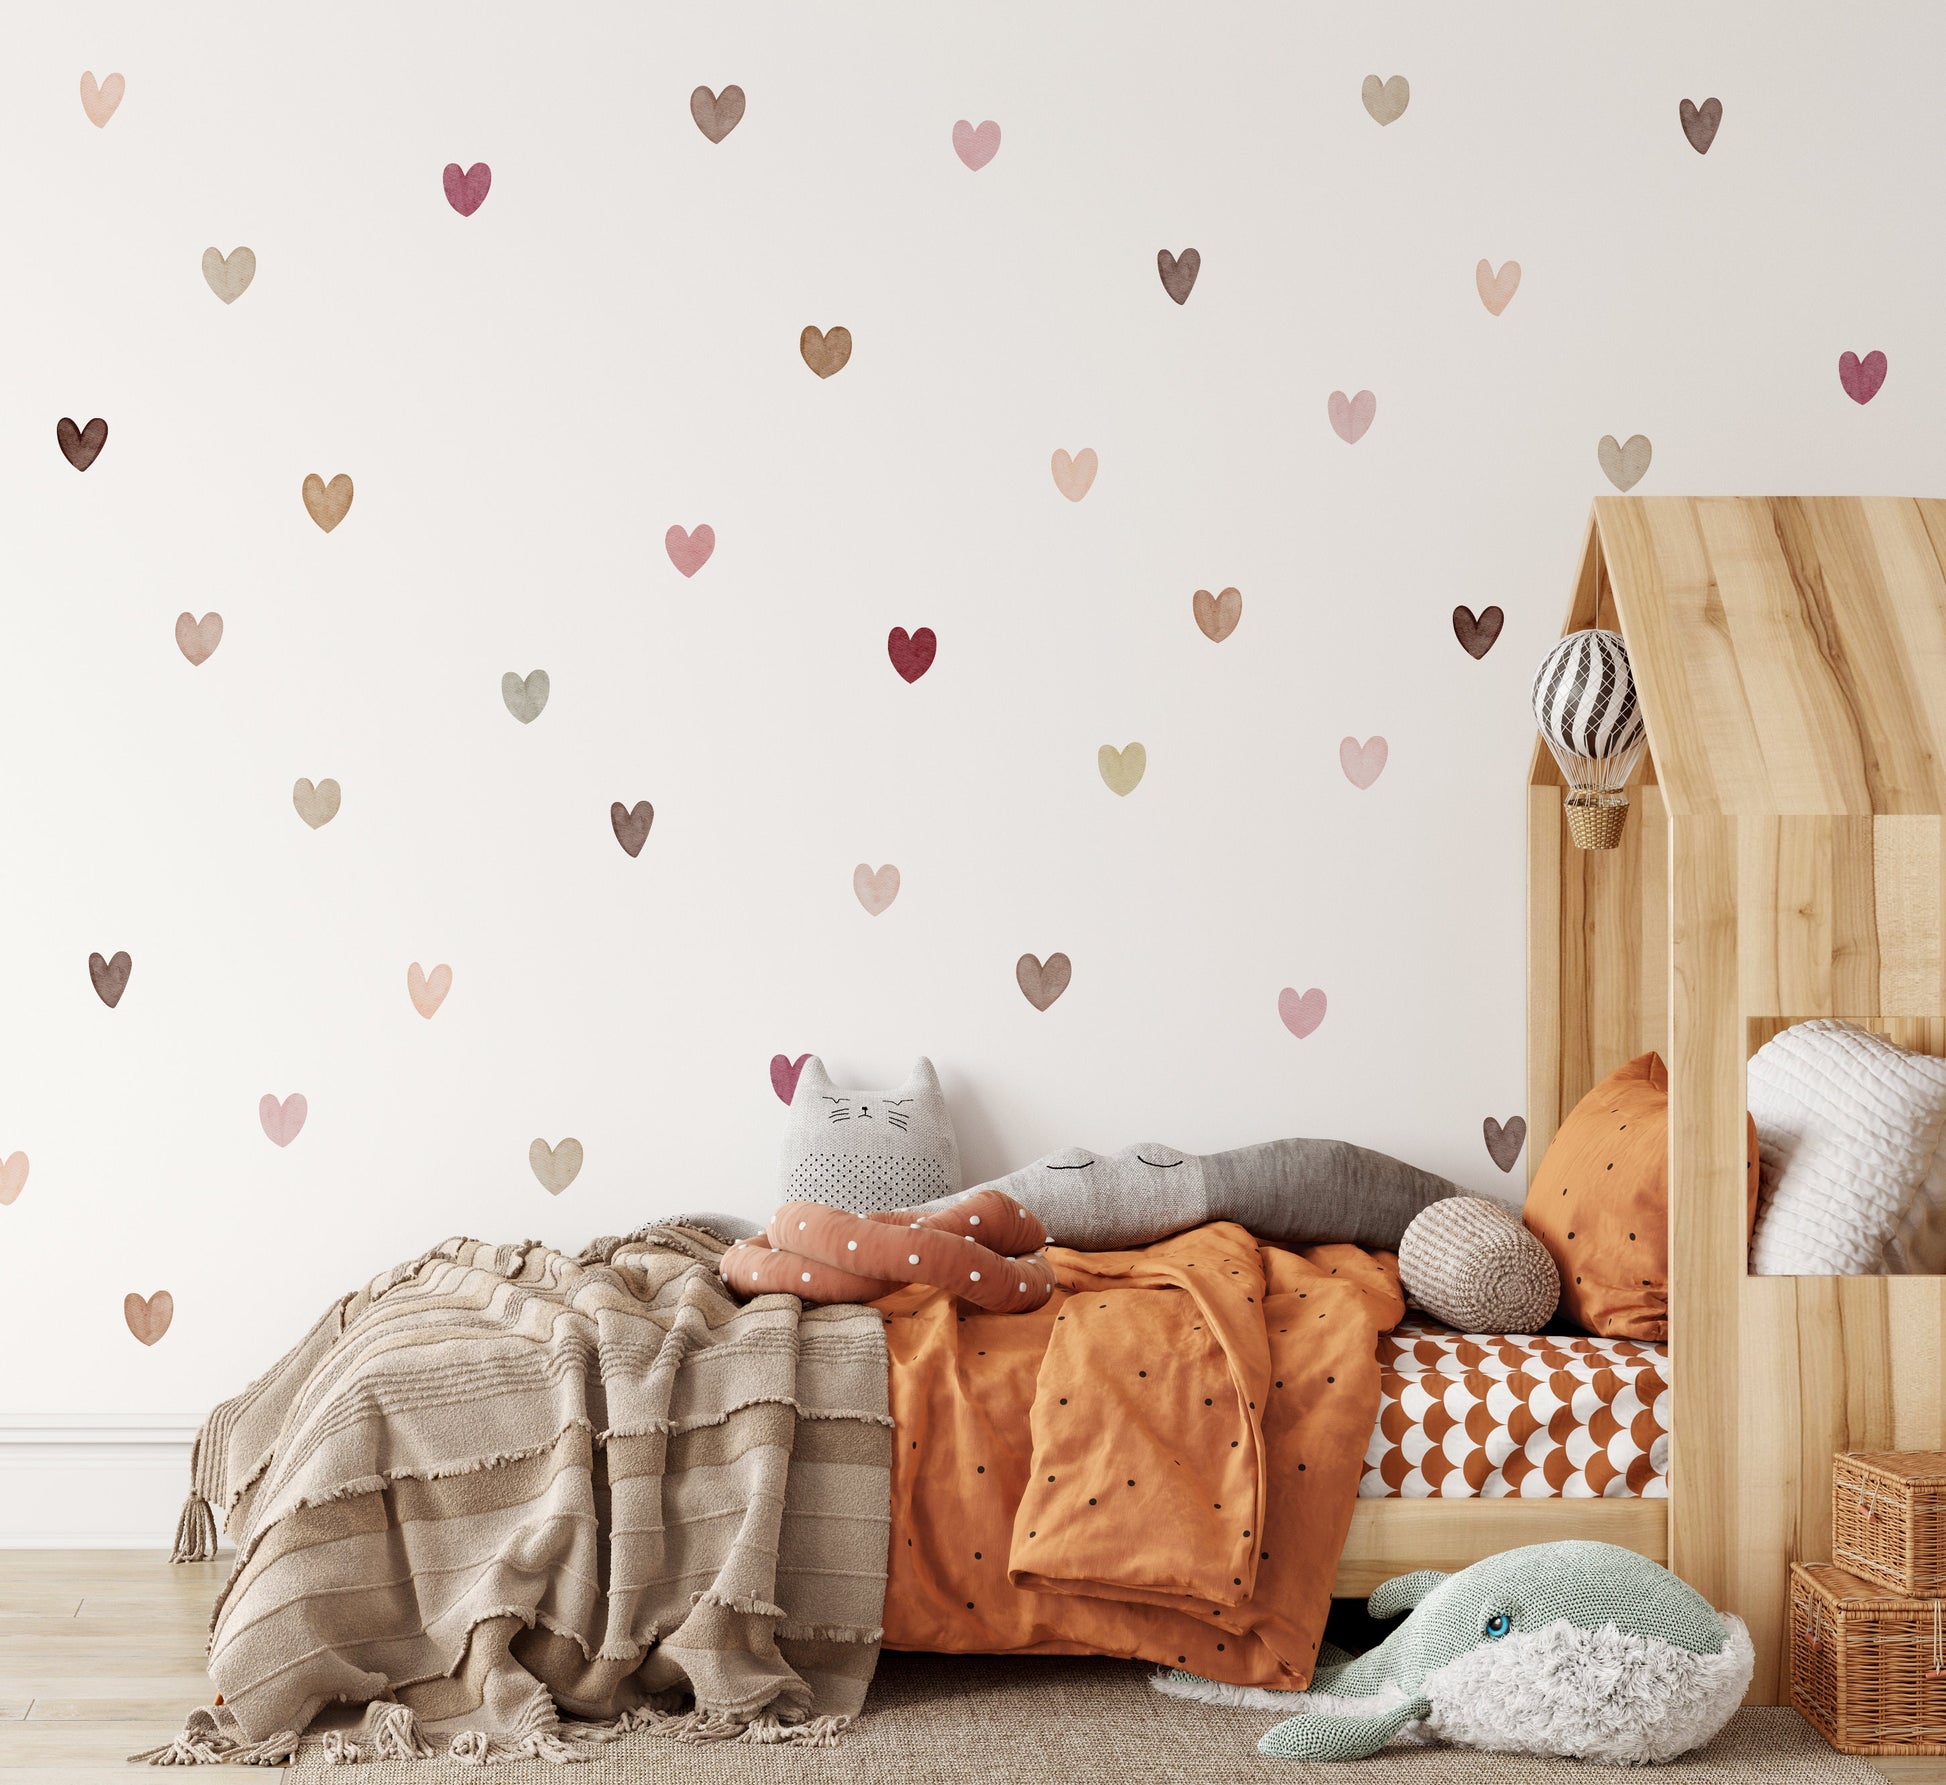 Rustic Boho Chic Heart Wall Stickers For Kids Rooms Nursery Decals Bedroom Stickers